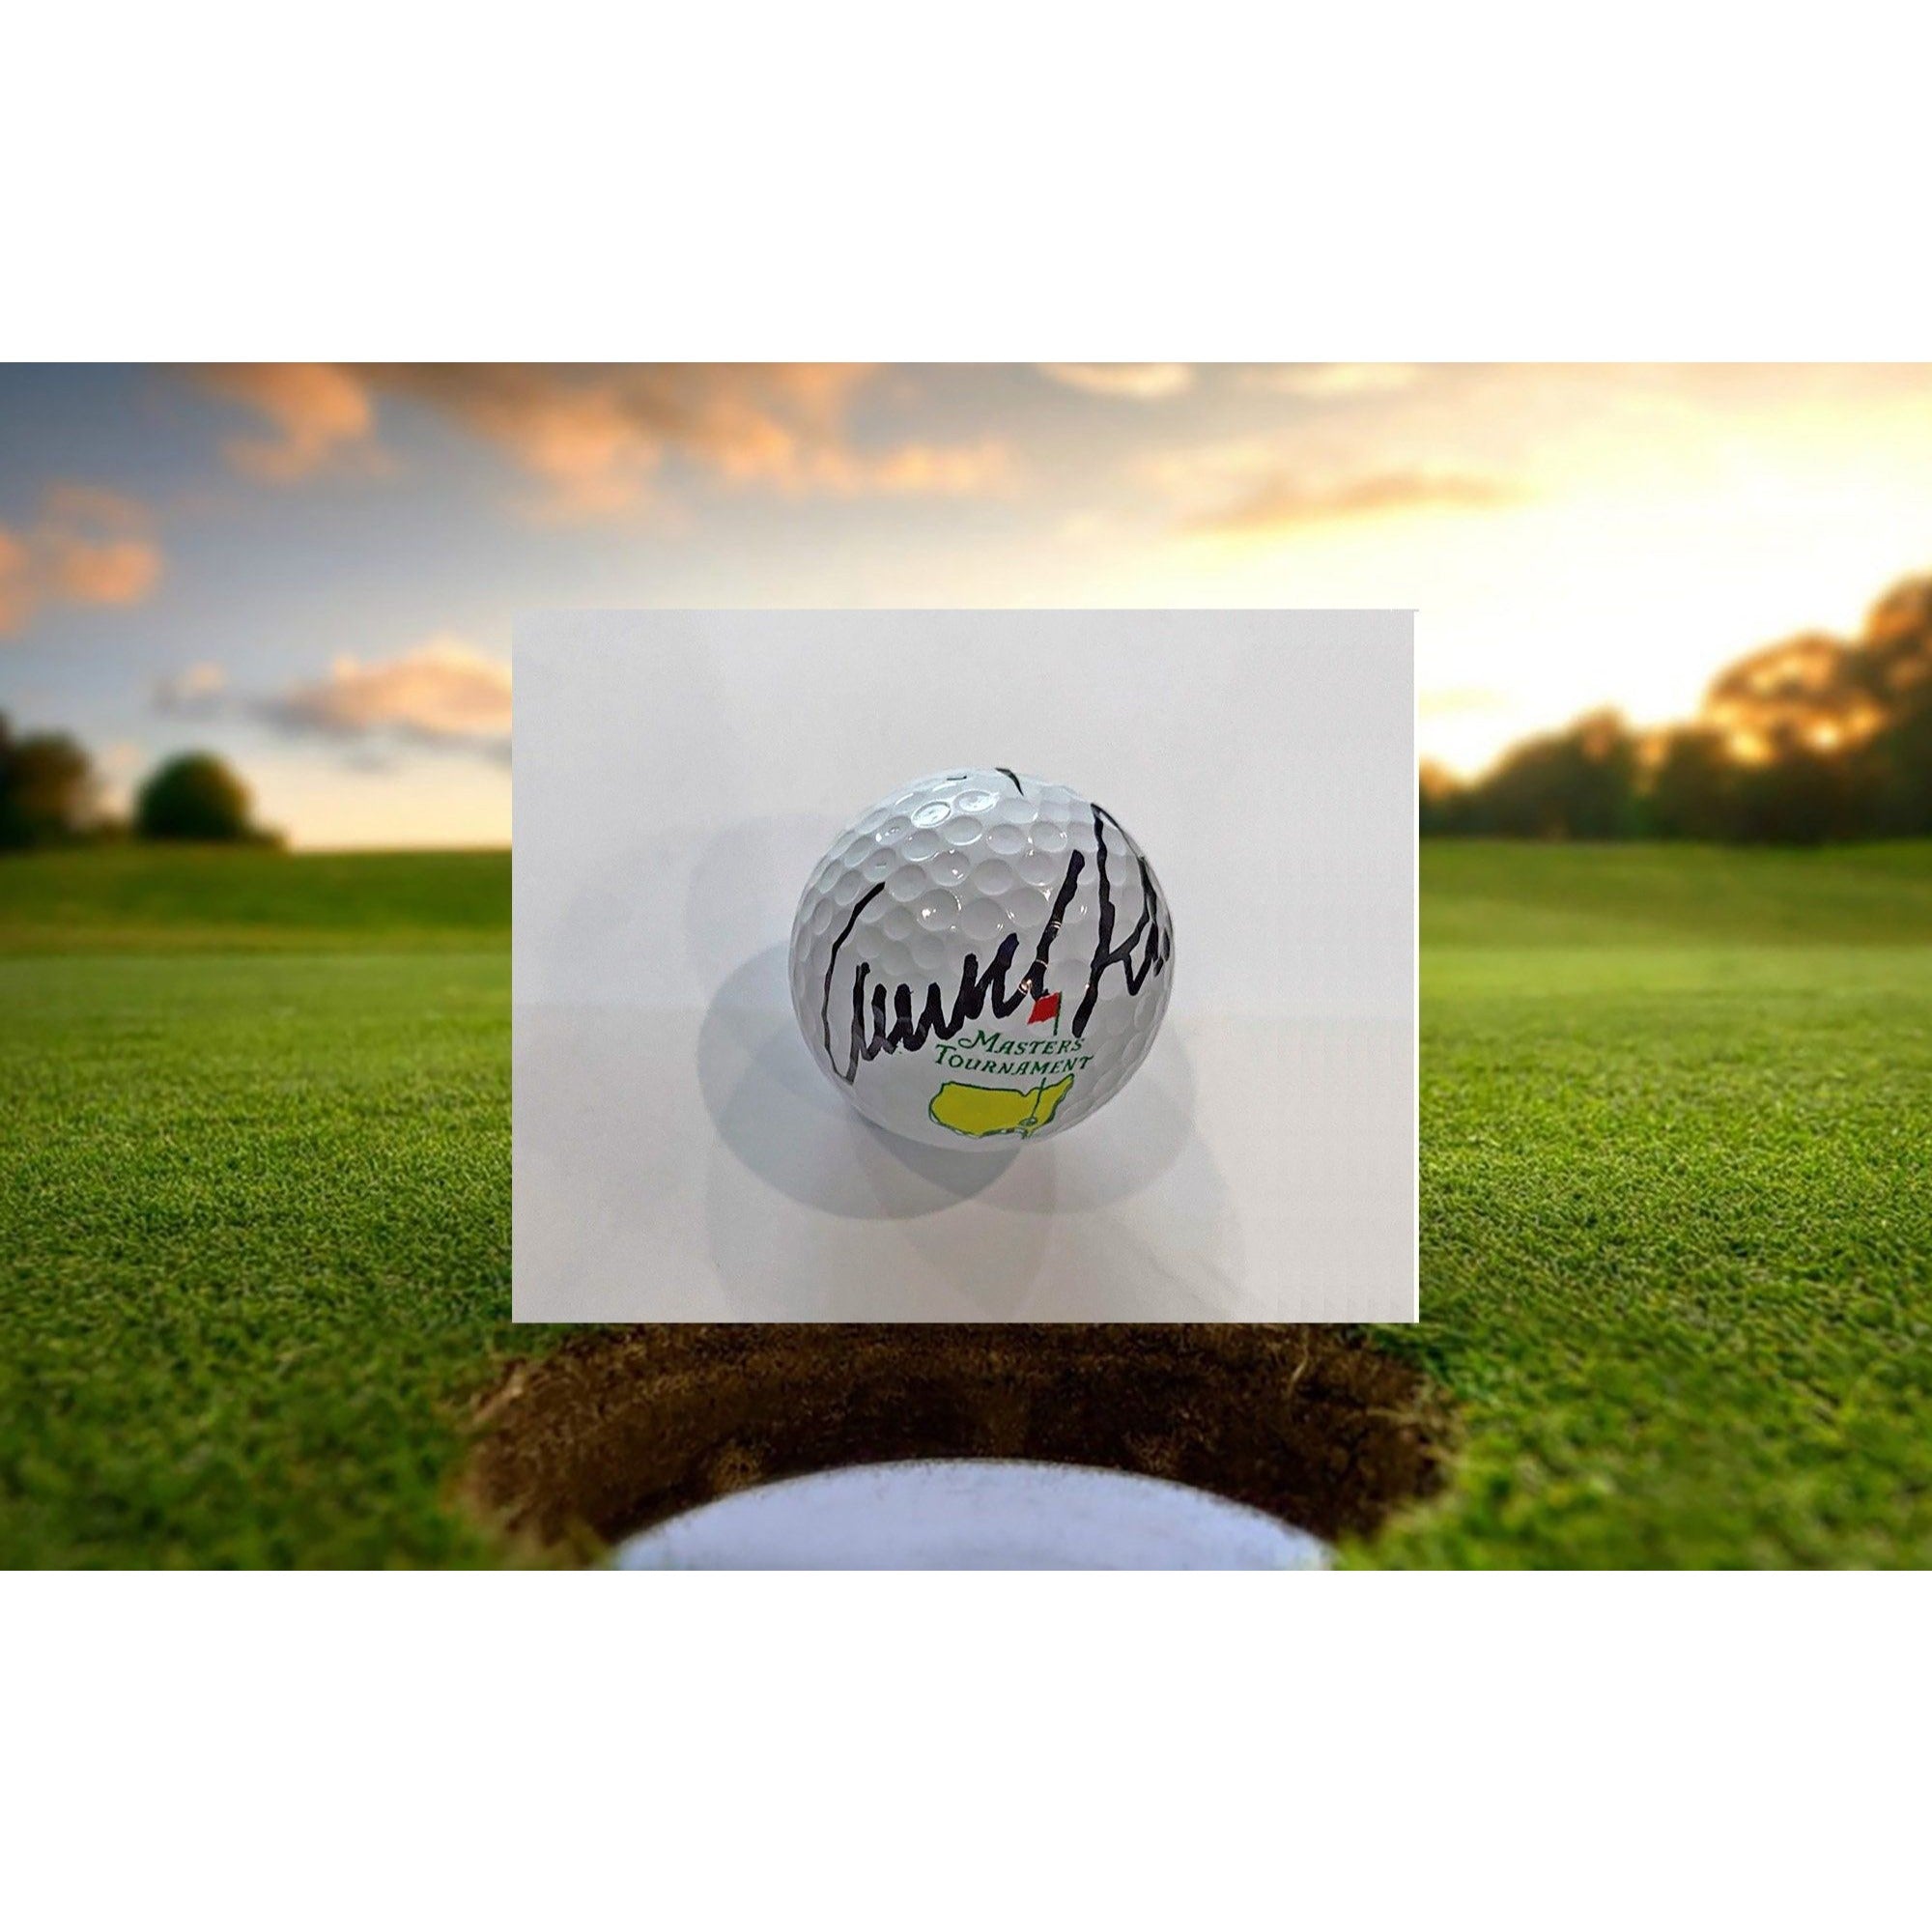 Arnold Palmer Master signed golf ball with proof